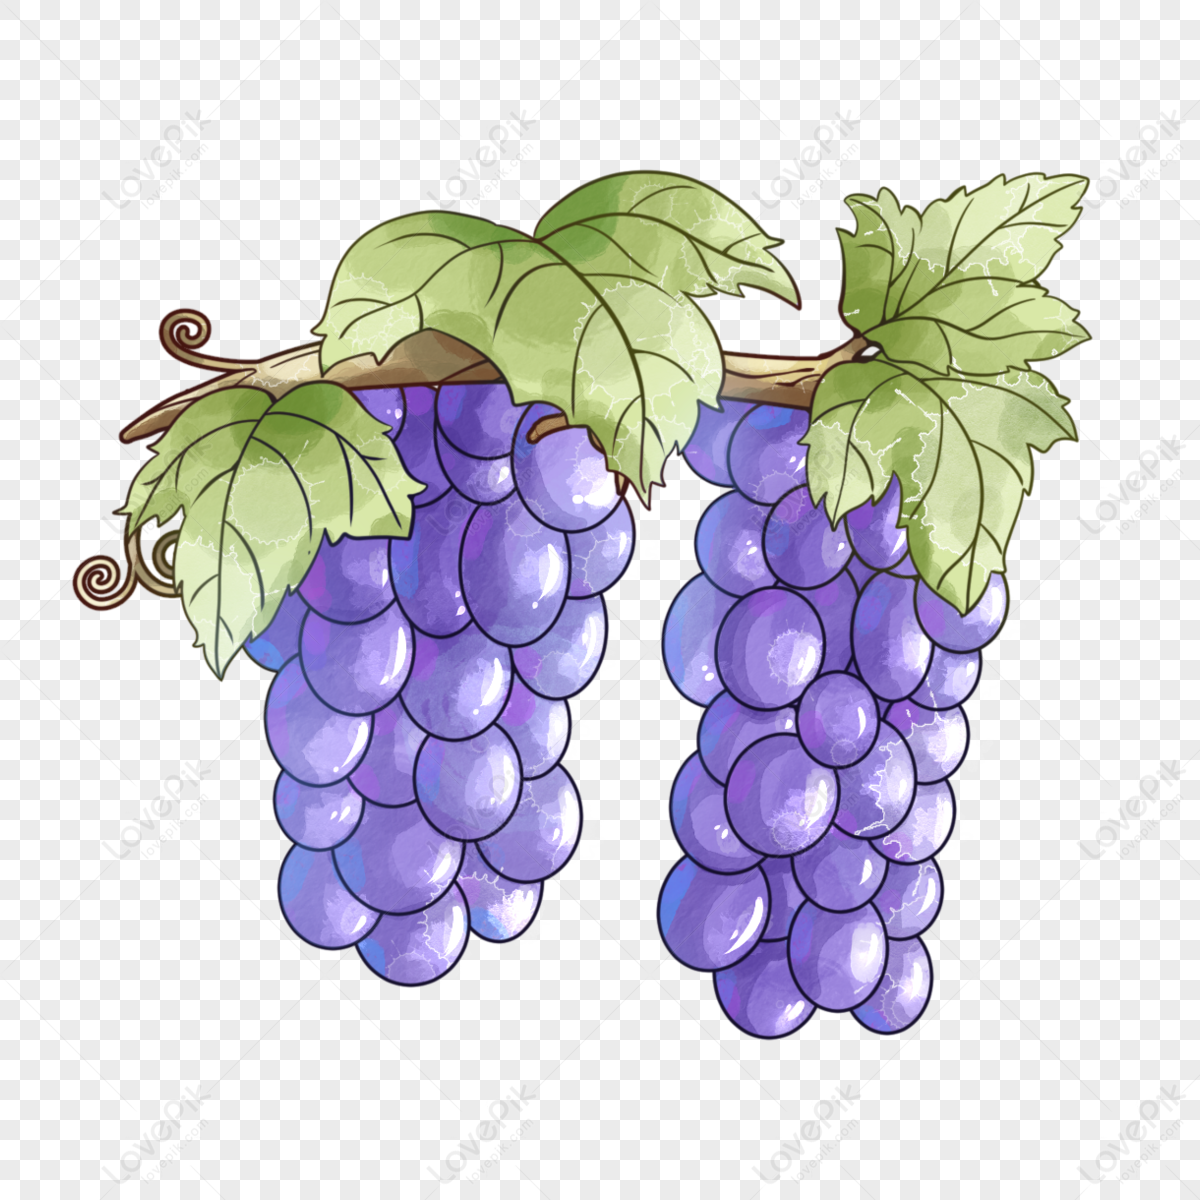 Bunch of grapes. Ink and watercolor drawing - Stock Illustration [97986482]  - PIXTA